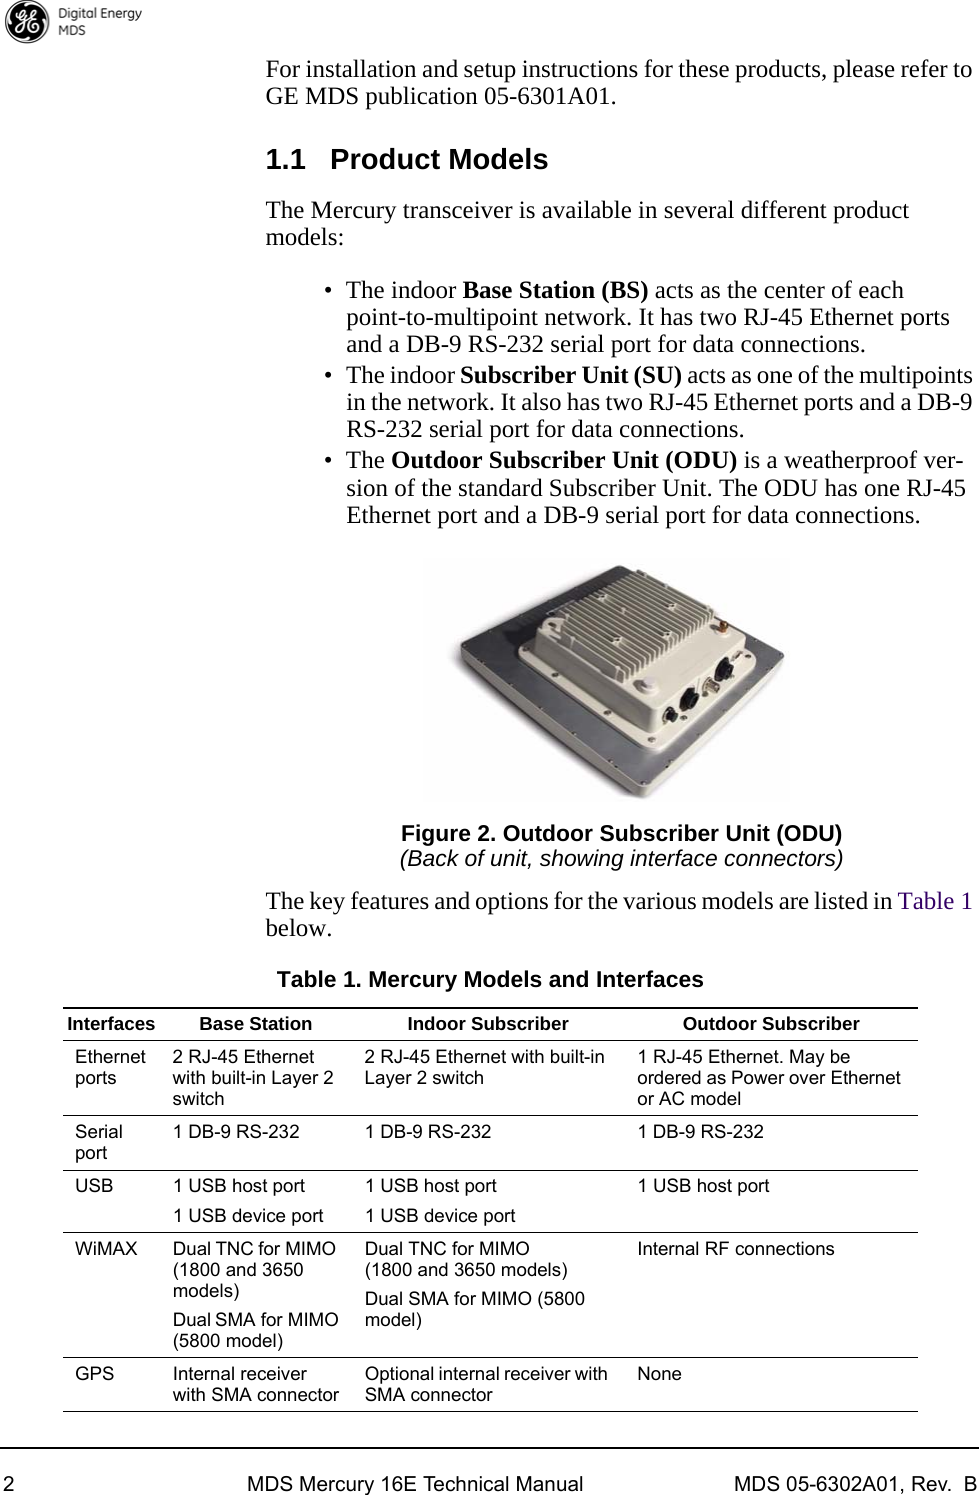 2 MDS Mercury 16E Technical Manual MDS 05-6302A01, Rev.  BFor installation and setup instructions for these products, please refer to GE MDS publication 05-6301A01.1.1 Product ModelsThe Mercury transceiver is available in several different product models:• The indoor Base Station (BS) acts as the center of each point-to-multipoint network. It has two RJ-45 Ethernet ports and a DB-9 RS-232 serial port for data connections.• The indoor Subscriber Unit (SU) acts as one of the multipoints in the network. It also has two RJ-45 Ethernet ports and a DB-9 RS-232 serial port for data connections.• The Outdoor Subscriber Unit (ODU) is a weatherproof ver-sion of the standard Subscriber Unit. The ODU has one RJ-45 Ethernet port and a DB-9 serial port for data connections.Invisible place holderFigure 2. Outdoor Subscriber Unit (ODU)(Back of unit, showing interface connectors)The key features and options for the various models are listed in Table 1 below.Table 1. Mercury Models and InterfacesInterfaces Base Station Indoor Subscriber Outdoor SubscriberEthernet ports2 RJ-45 Ethernet with built-in Layer 2 switch2 RJ-45 Ethernet with built-in Layer 2 switch1 RJ-45 Ethernet. May be ordered as Power over Ethernet or AC modelSerial port1 DB-9 RS-232 1 DB-9 RS-232 1 DB-9 RS-232USB 1 USB host port1 USB device port1 USB host port1 USB device port1 USB host portWiMAX Dual TNC for MIMO (1800 and 3650 models)Dual SMA for MIMO (5800 model)Dual TNC for MIMO(1800 and 3650 models)Dual SMA for MIMO (5800 model)Internal RF connectionsGPS Internal receiver with SMA connectorOptional internal receiver with SMA connectorNone